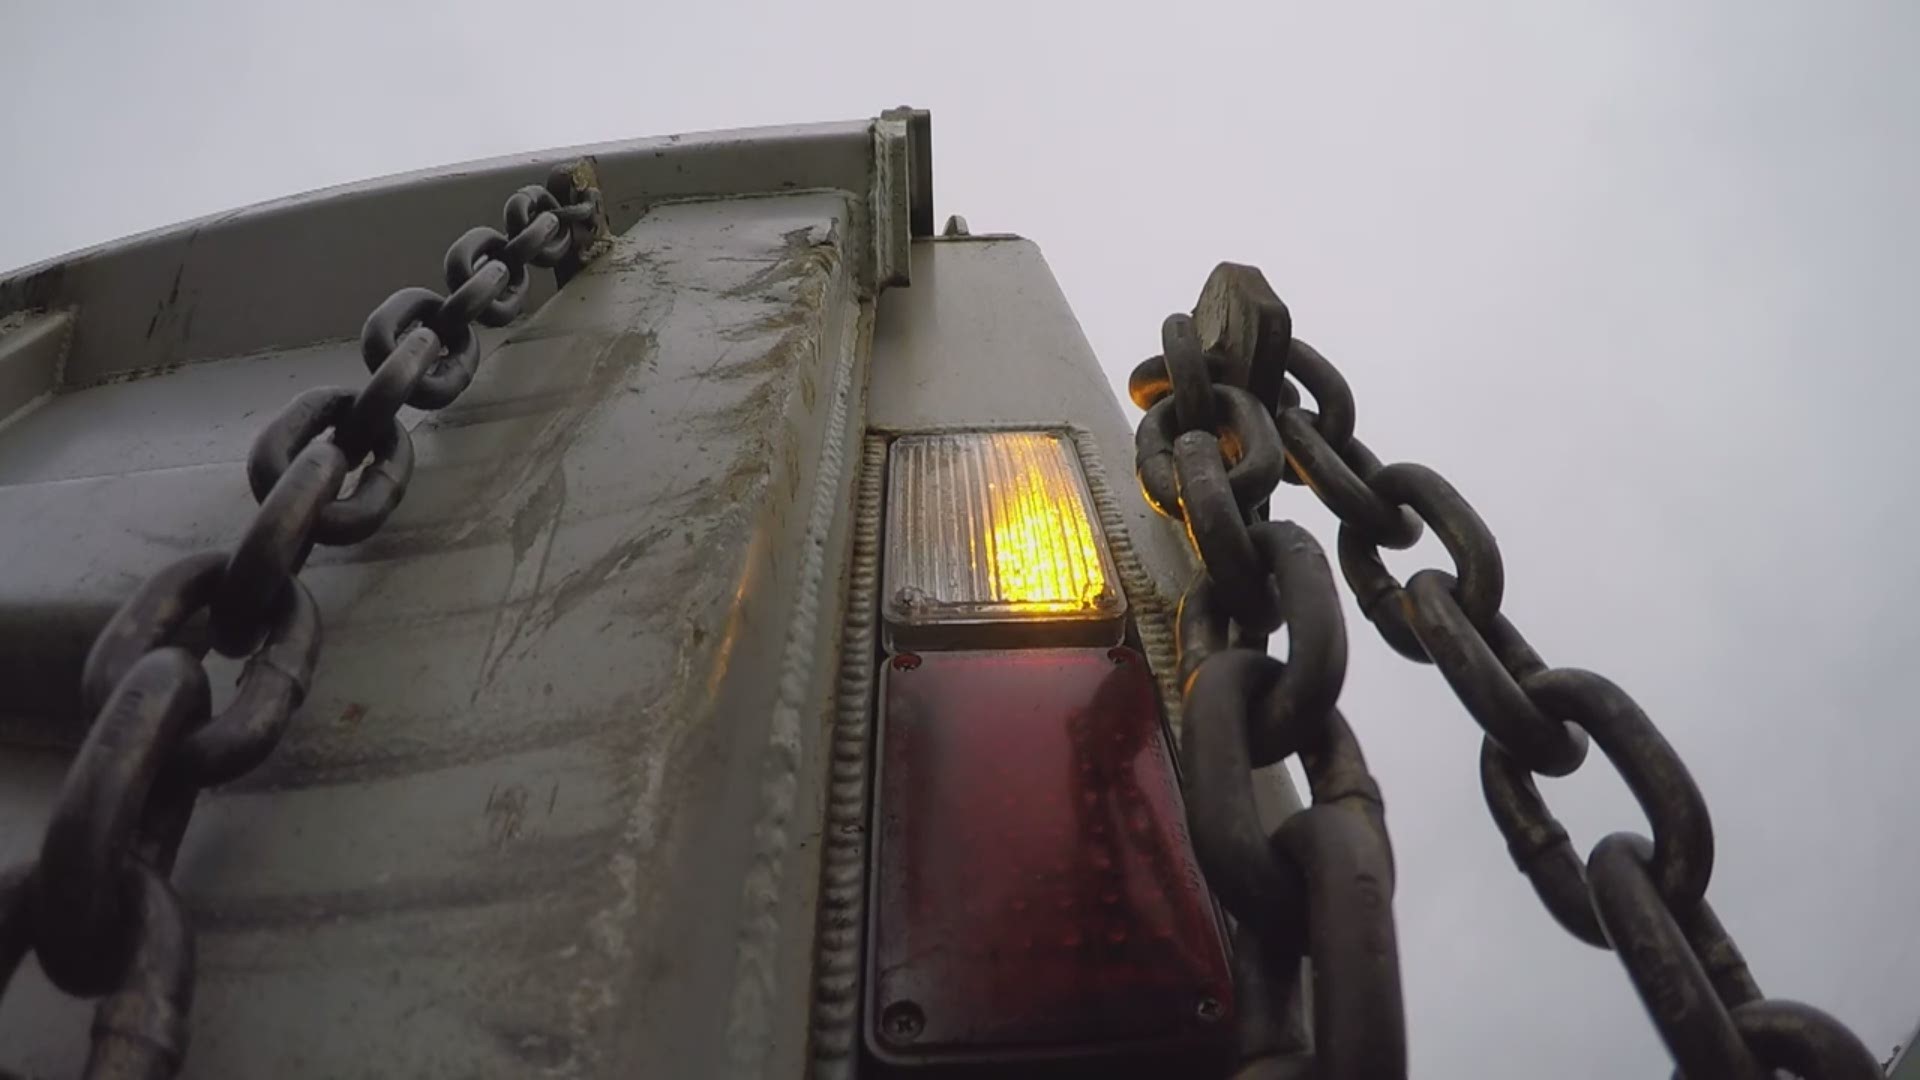 Plows with green lights installed are designed to get the attention of Maine drivers